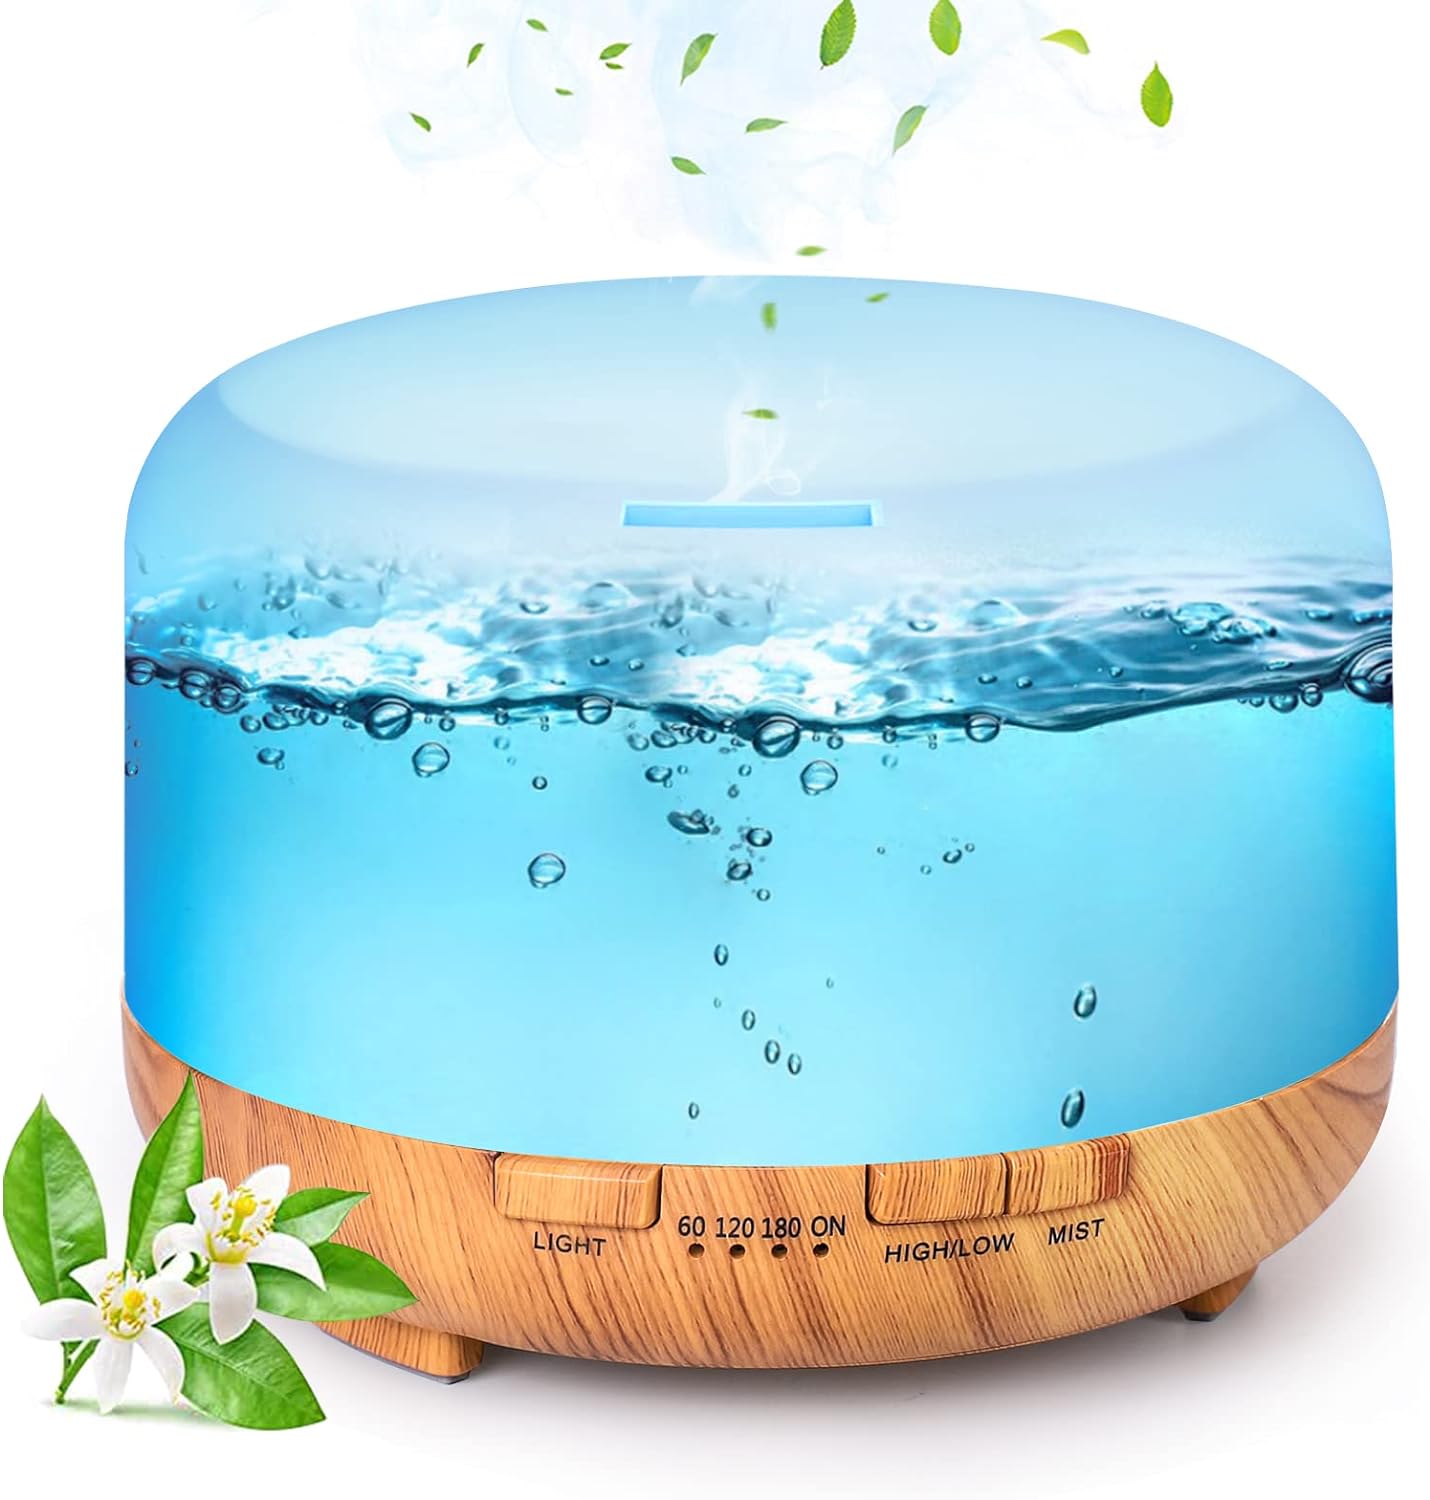 Essential Oil Diffuser, YIKUBEE Oil Diffuser, 500ml Humidifier, Diffusers for Home, Aromatherapy Diffuser with Remote Control, Diffusers for Essential Oils Large Room